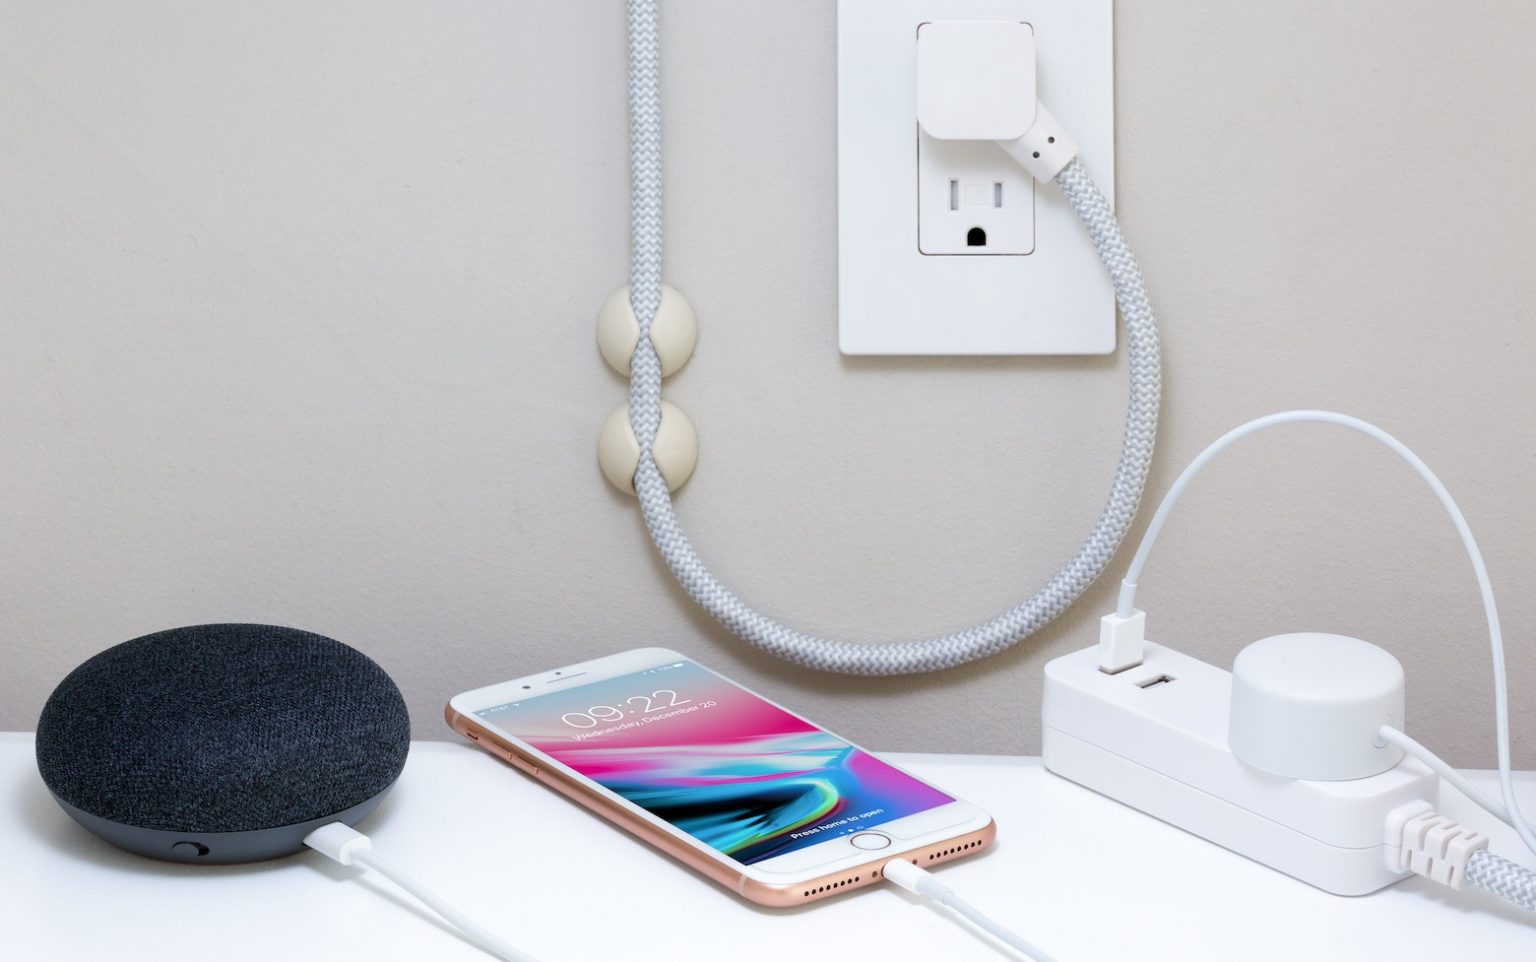 Make life easier with these awesome chargers for your iPhone.